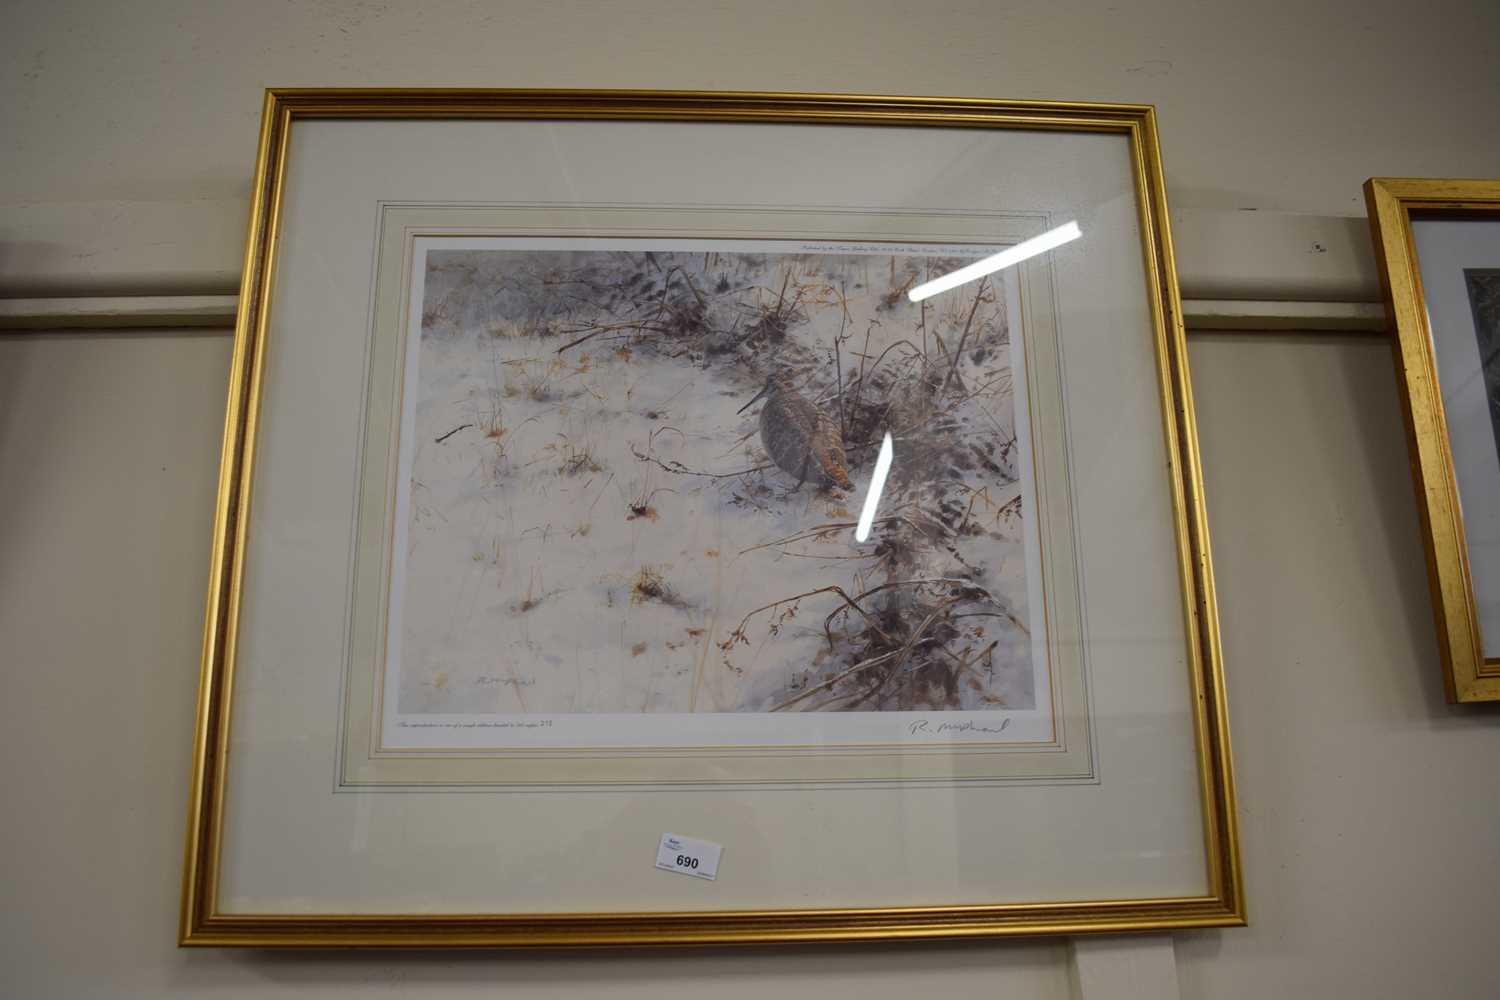 Rodger McPhal woodcock in snow, coloured print, limited edition, 395 of 500, framed and glazed